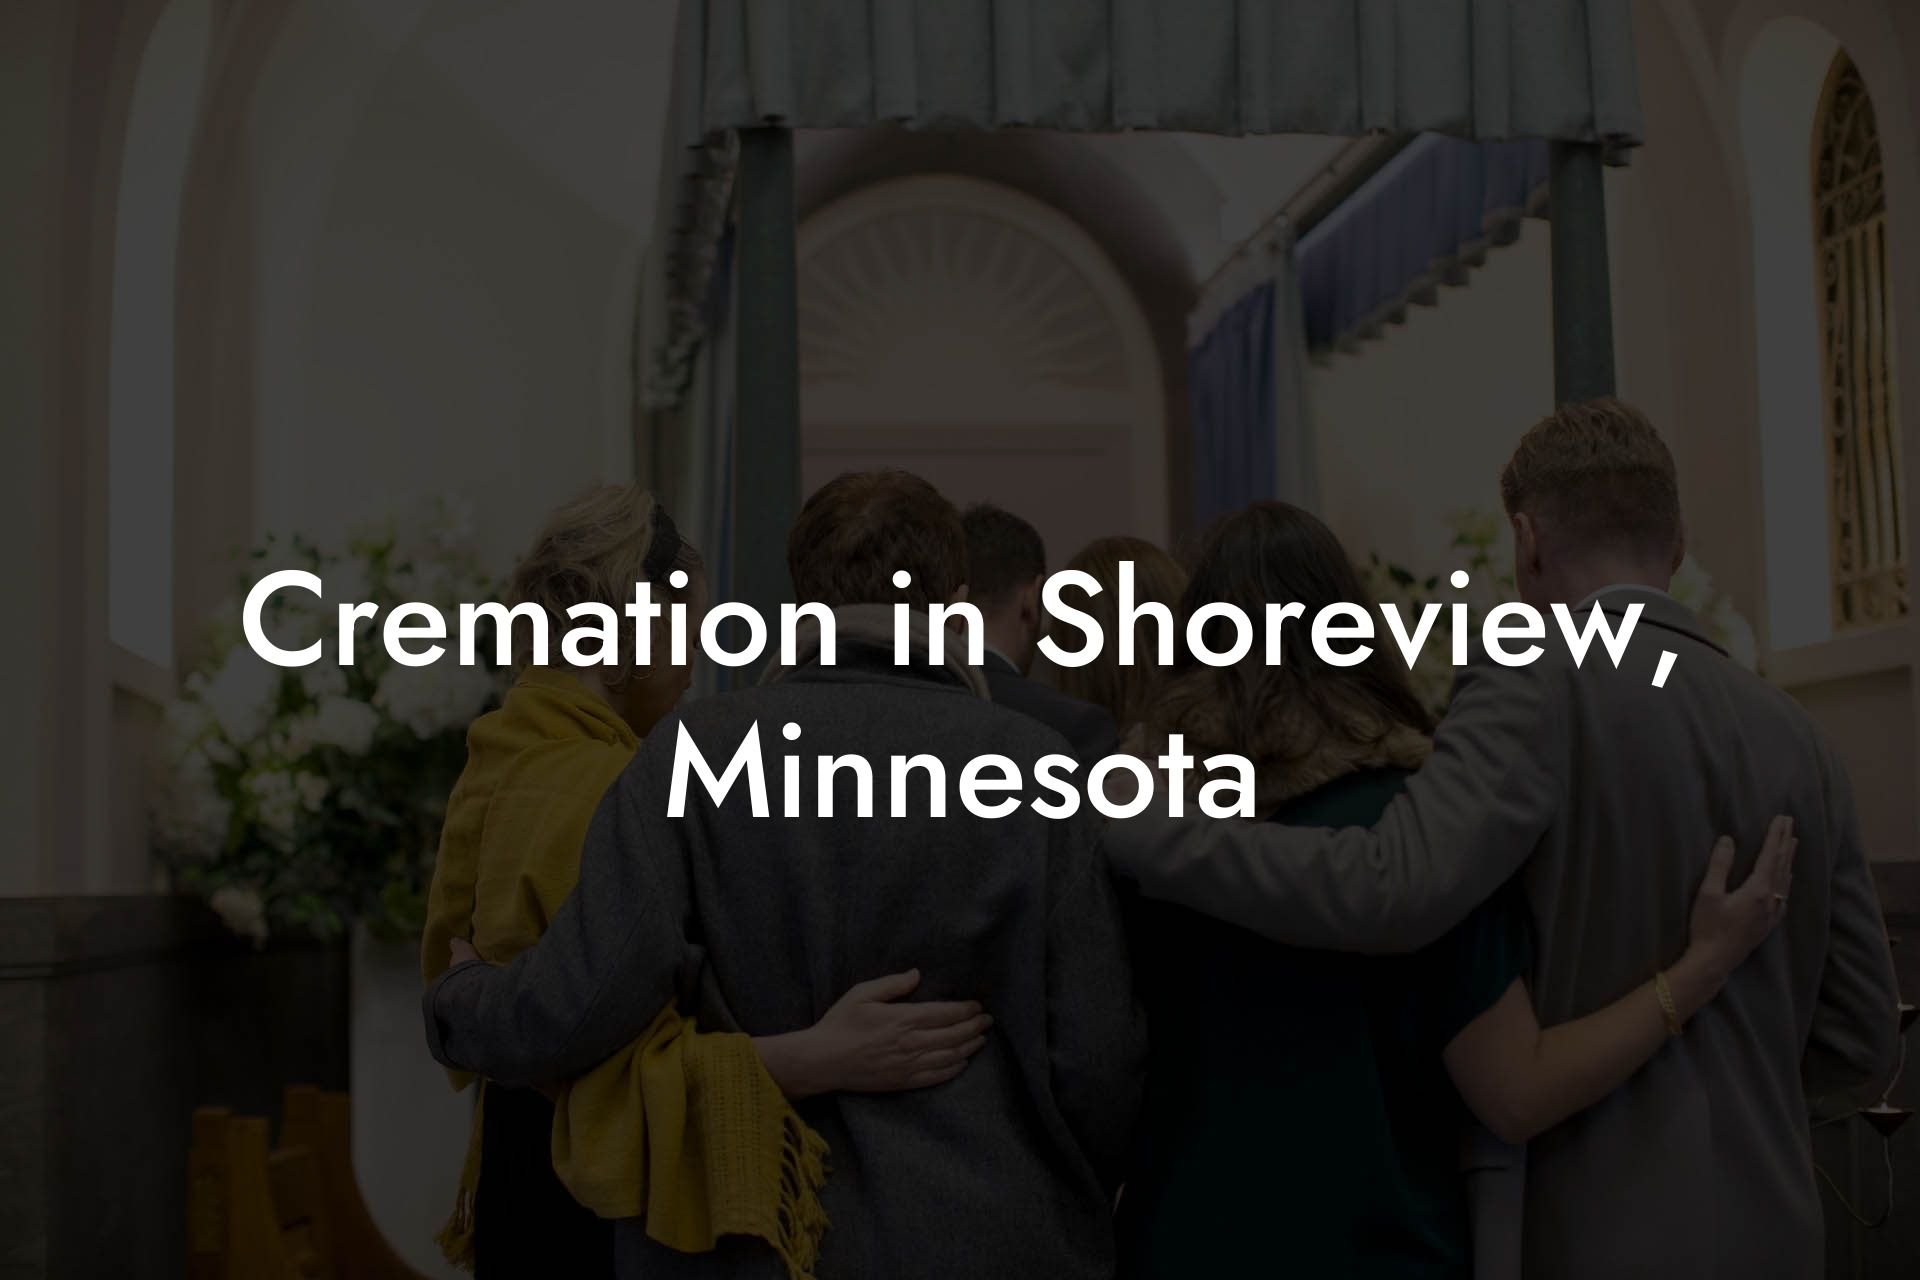 Cremation in Shoreview, Minnesota